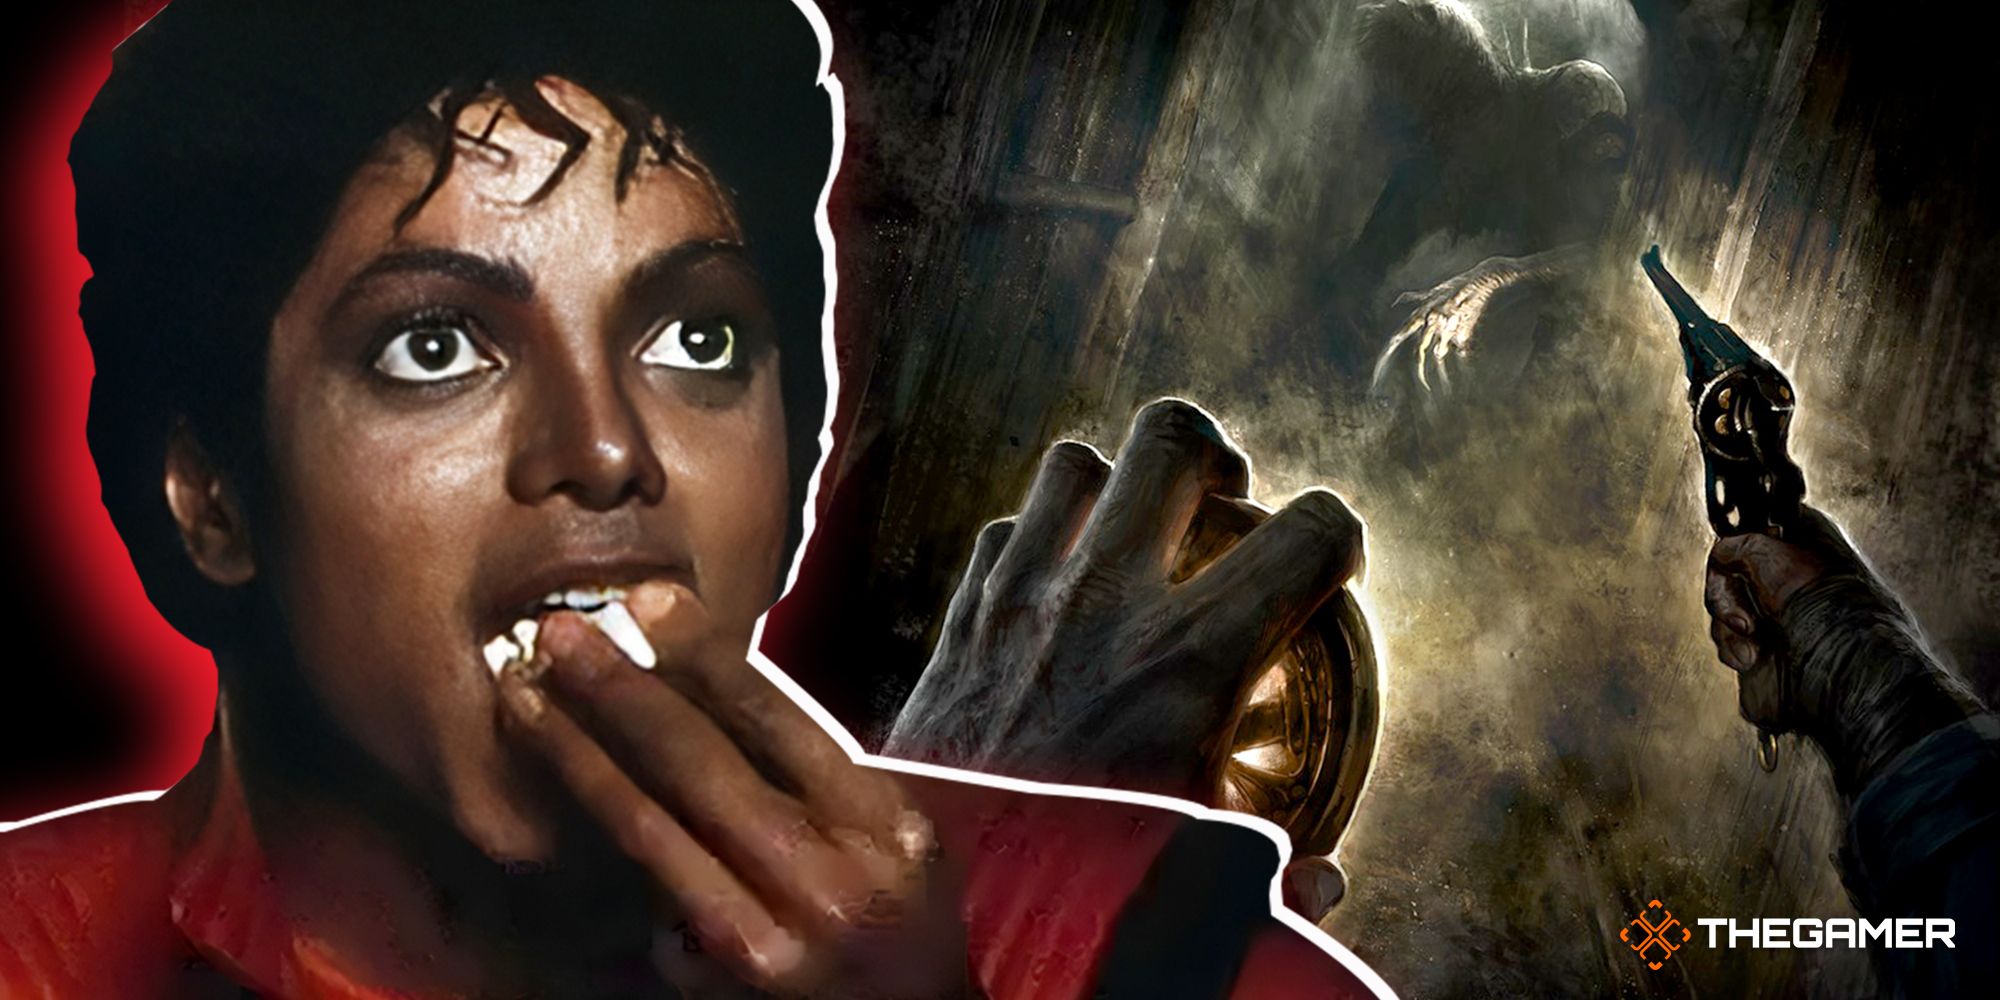 Split image: On the left, Michael Jackson eating popcorn. On the right, the perspective of the character in Amnesia: The Bunker, with a hand holding a flashlight on one side and a hand holding a revolver on the other, with the monster surrounded by fog in the center.